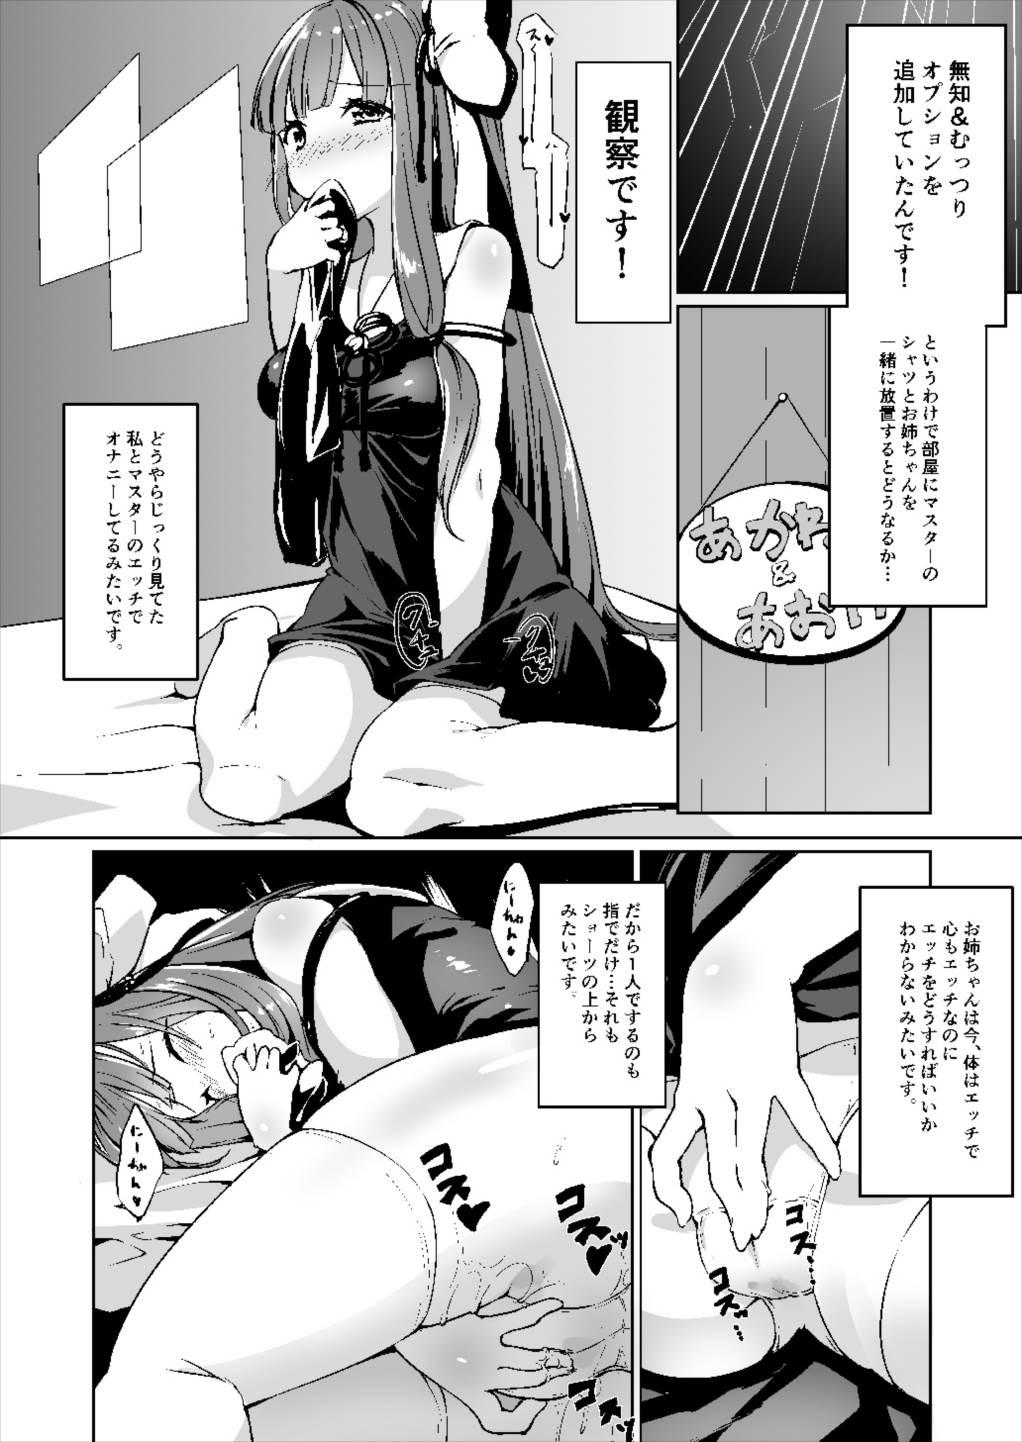 Puta コトノハラバーズ VOL.06 【お姉ちゃん観察日記】 - Vocaloid Voiceroid Cum In Mouth - Page 8